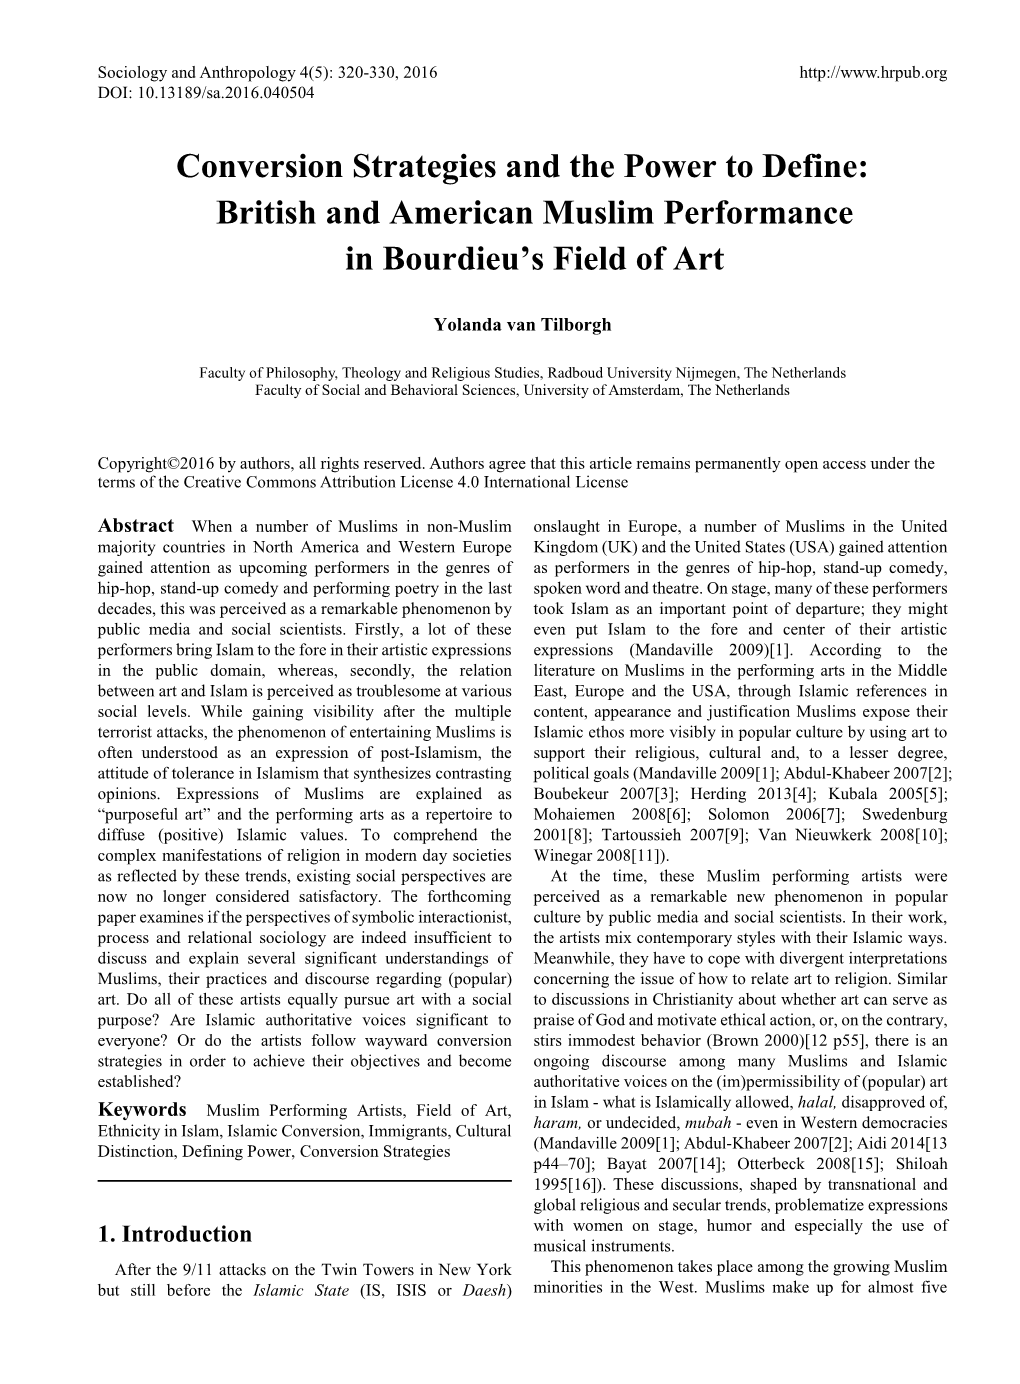 Conversion Strategies and the Power to Define: British and American Muslim Performance in Bourdieu’S Field of Art